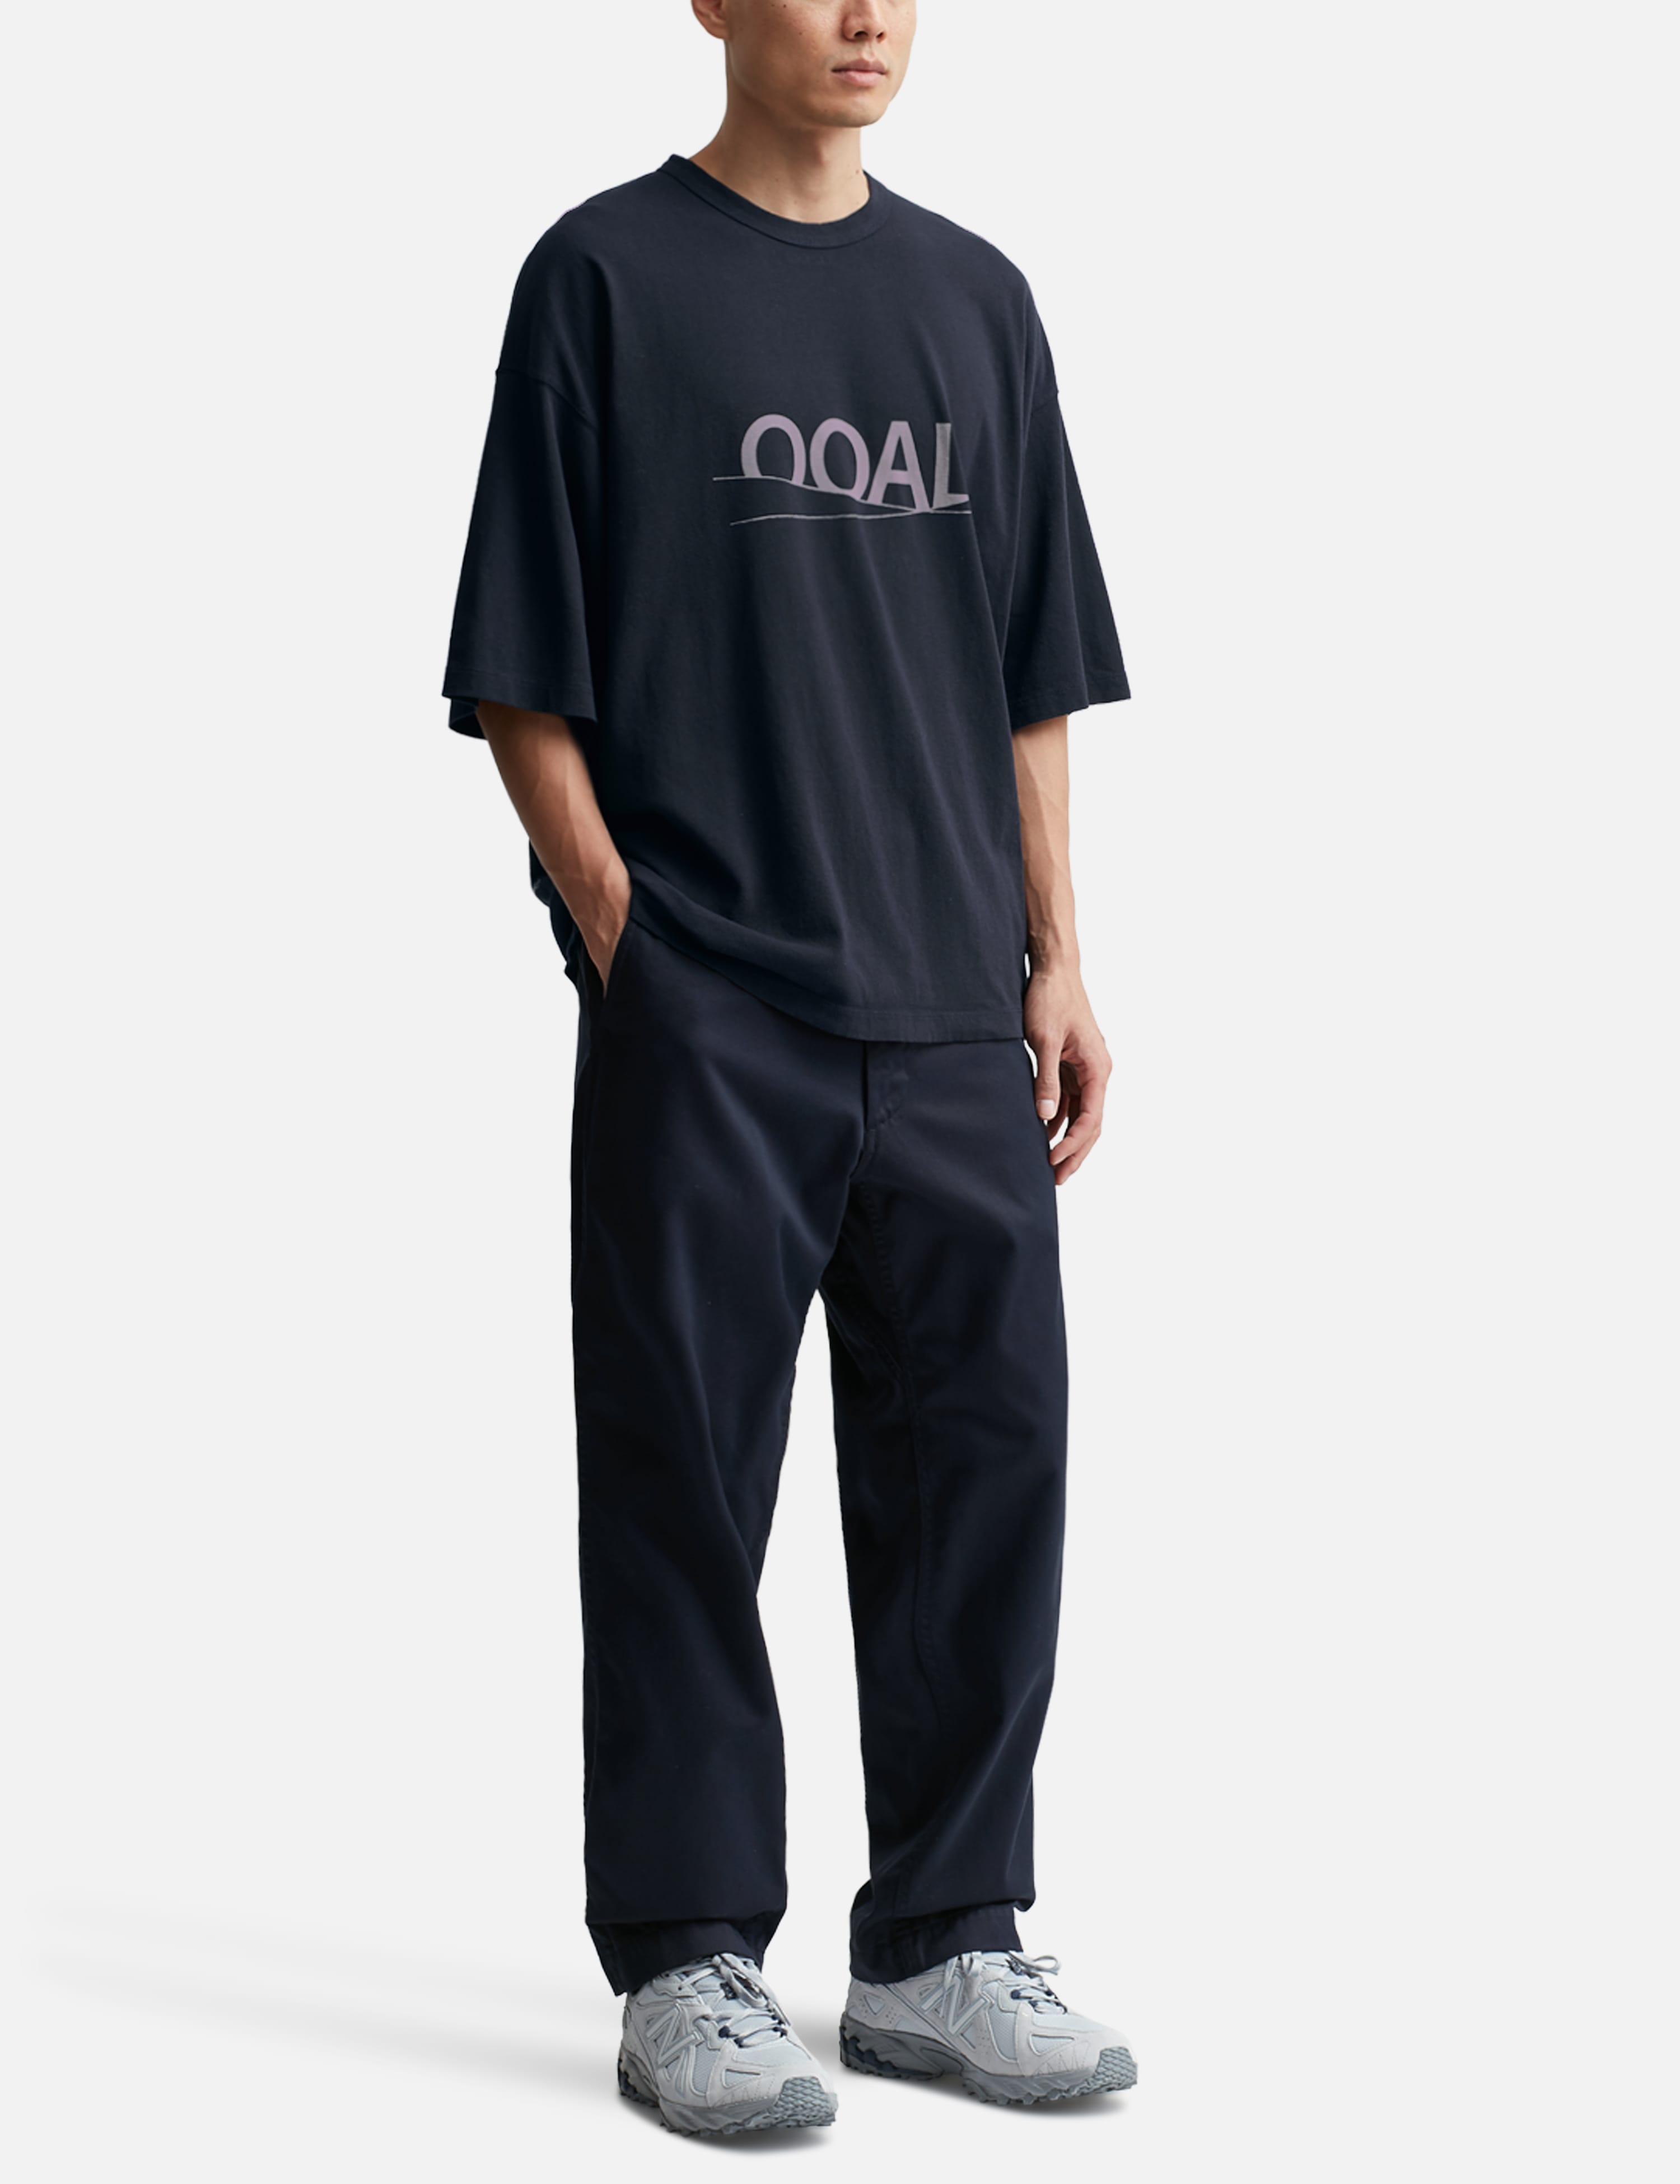 Nanamica - OOAL Oversized T-shirt | HBX - Globally Curated Fashion 